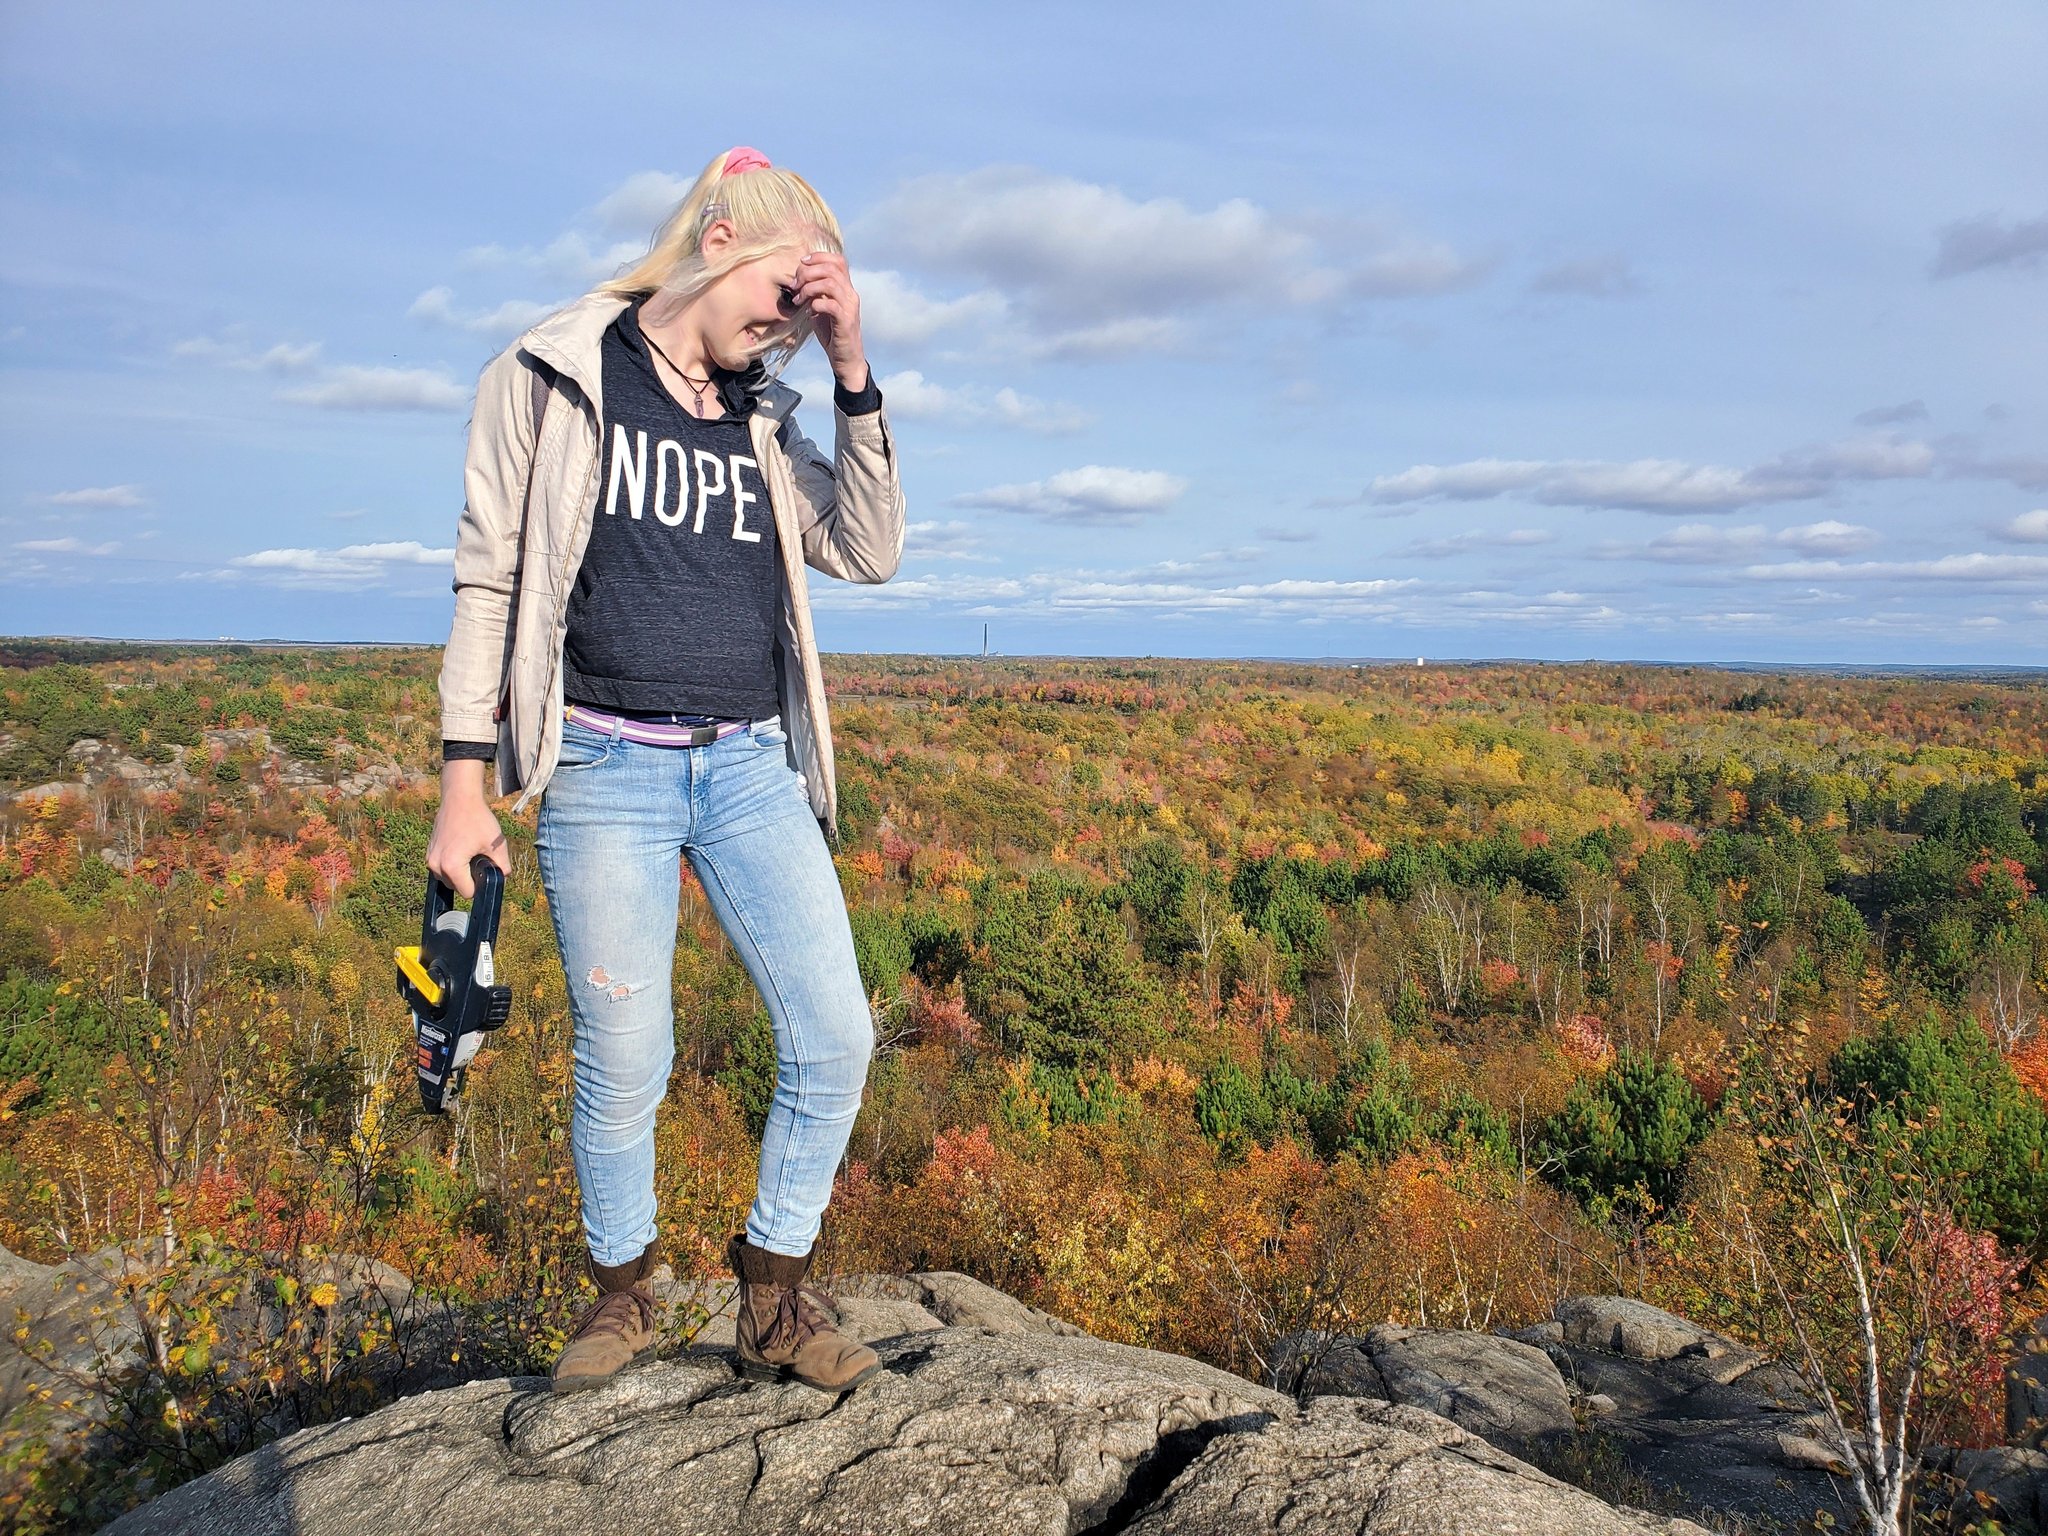 Me on an outcrop in Sudbury, being very Geologist-y